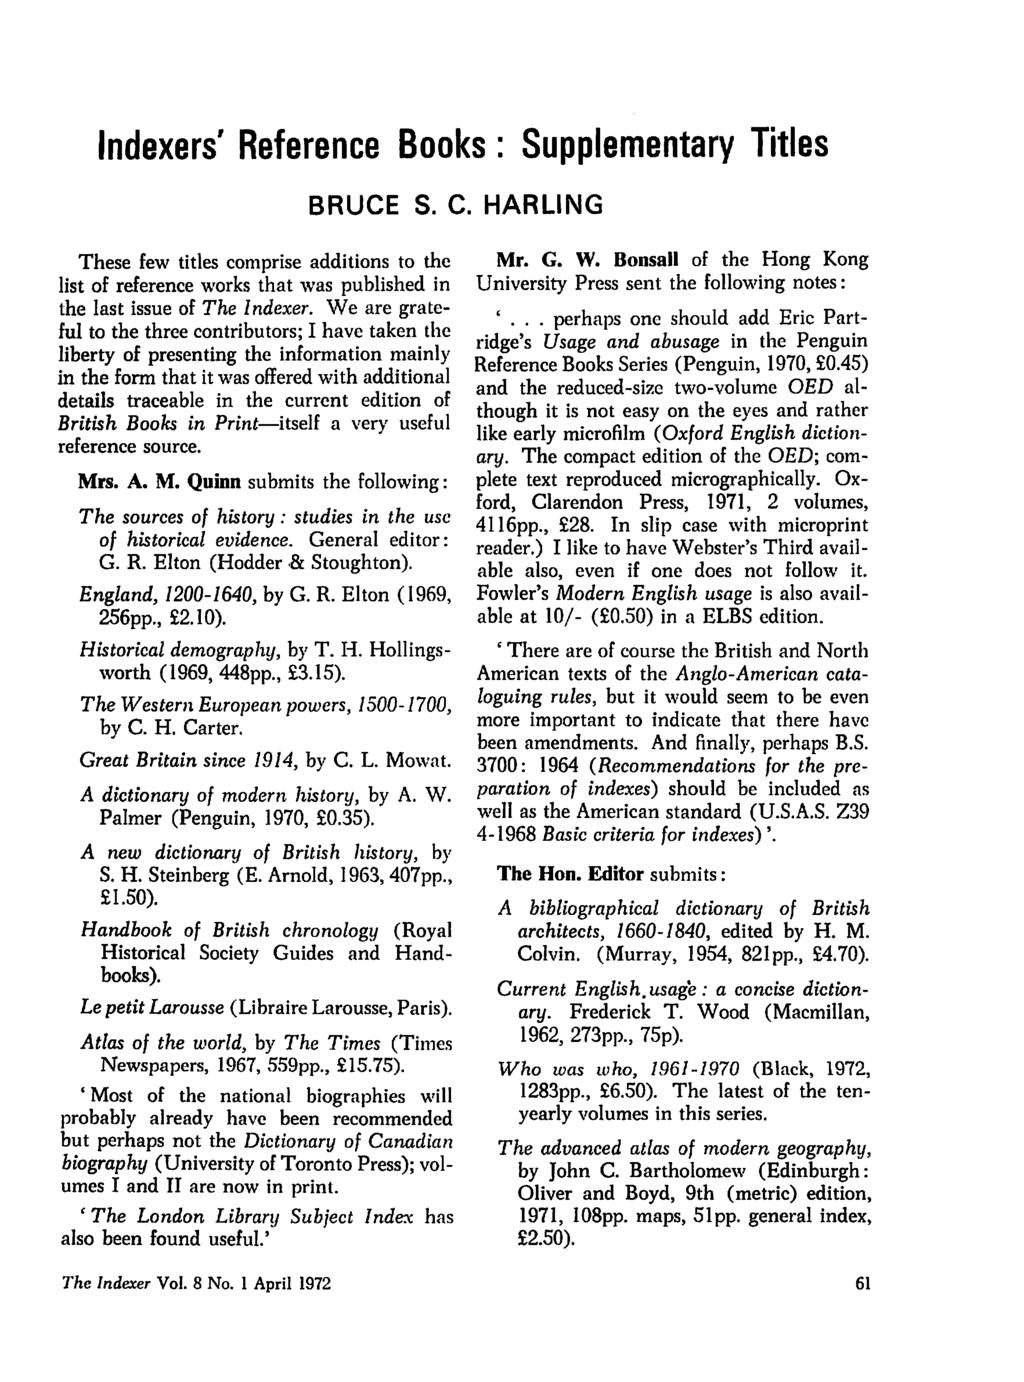 Indexers' Reference Books: Supplementary Titles BRUCE S. C. HARLING These few titles comprise additions to the list of reference works that was published in the last issue of The Indexer.